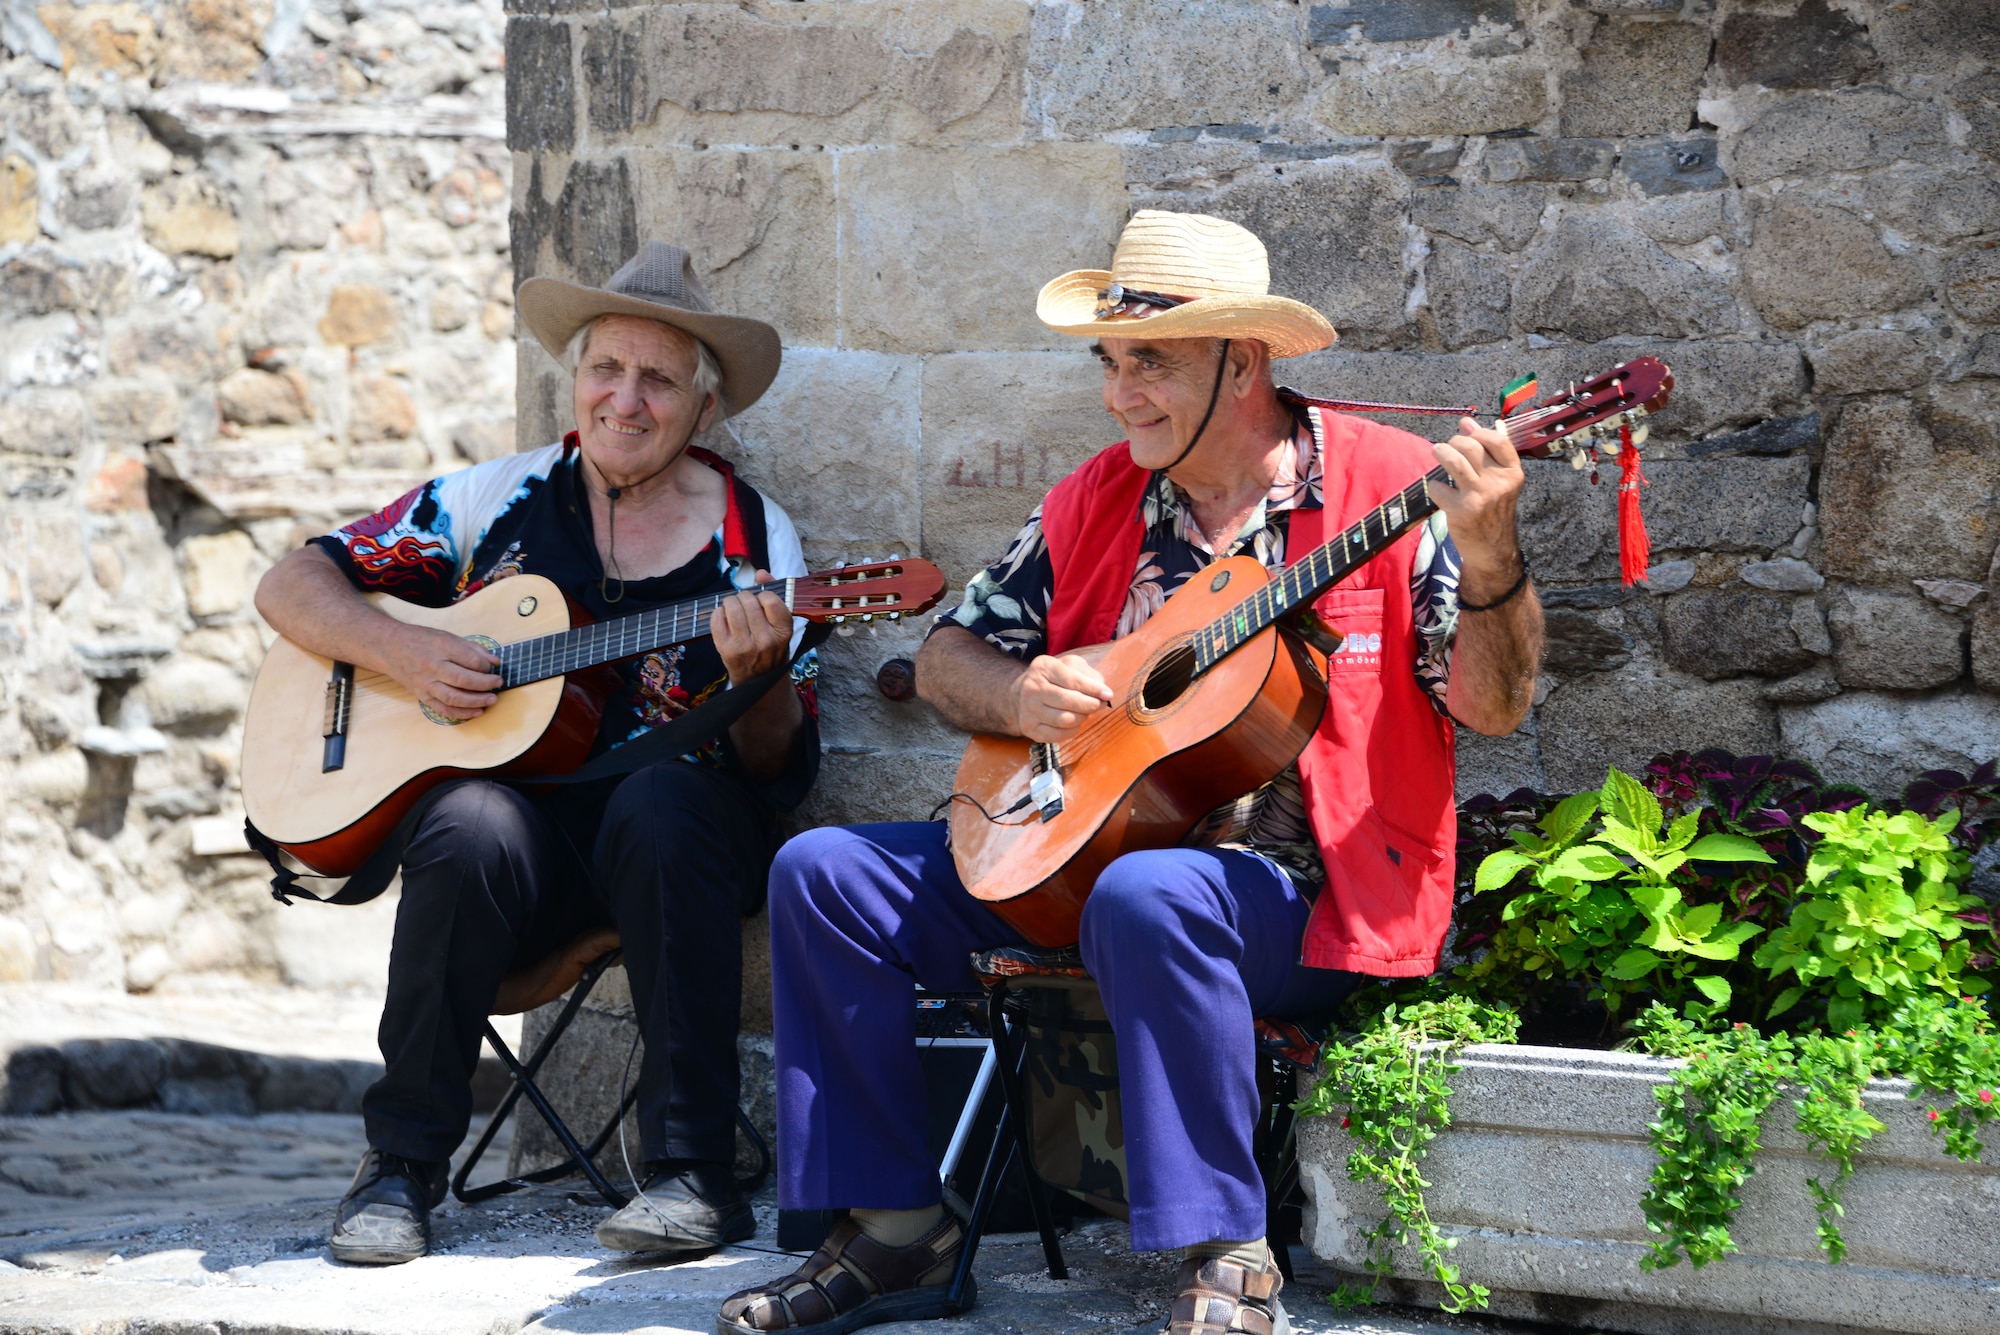 Street musicians perform for passerby's on the cobblestone streets in Nessebar, Bulgaria.  Airmen and Soldiers from the Tennessee National Guard enjoyed touring the area on Aug. 12, 2016 as part of a  Morale Wellness and Recreation event Aug. 12., 2016 while deployed to Novo Selo Training Area, Bulgaria.  Tennessee National Guard Soldiers and Airmen were on rotations as part of Operation Resolute Castle 16, an ongoing operation of military construction to build up Eastern European base infrastructure and help strengthen ties between Tennessee's state partnership with Bulgaria.  (U.S. Air National Guard photo by Master Sgt. Kendra M. Owenby, 134 ARW Public Affairs)